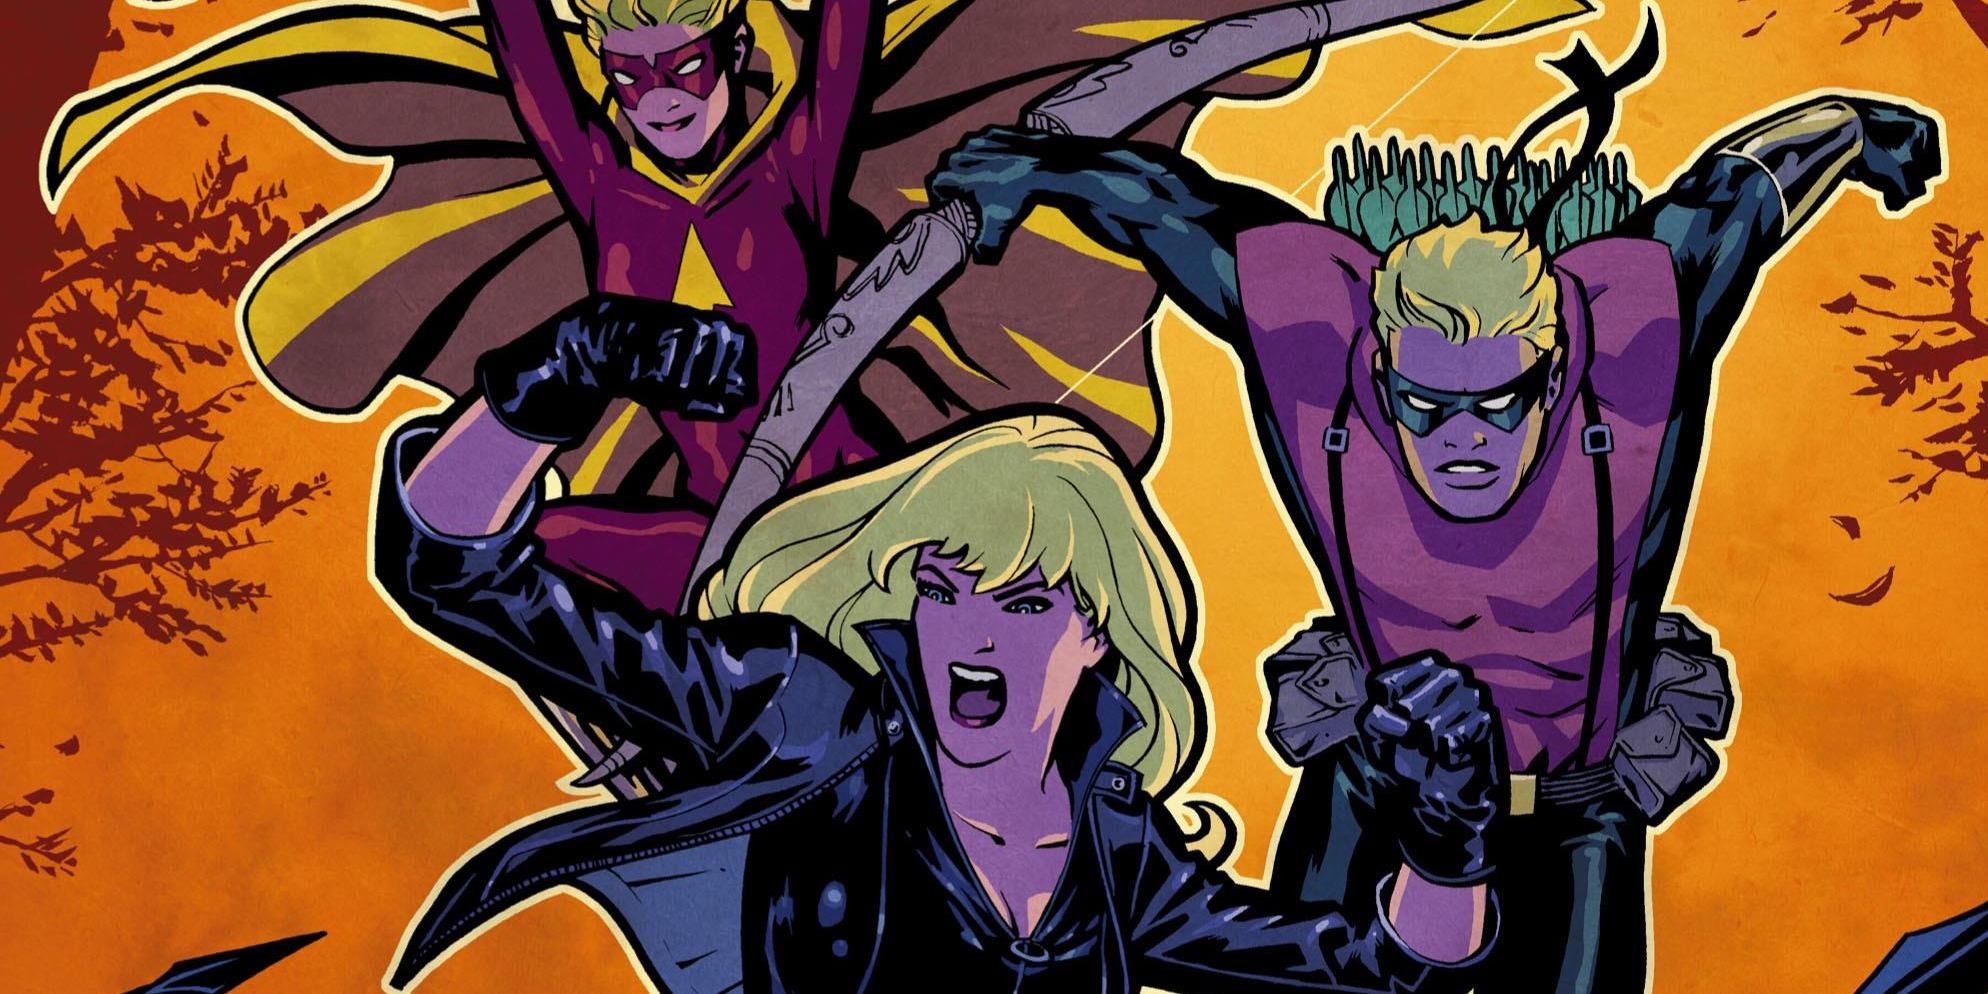 Speedy, Black Canary and Green Arrow by Cliff Chiang